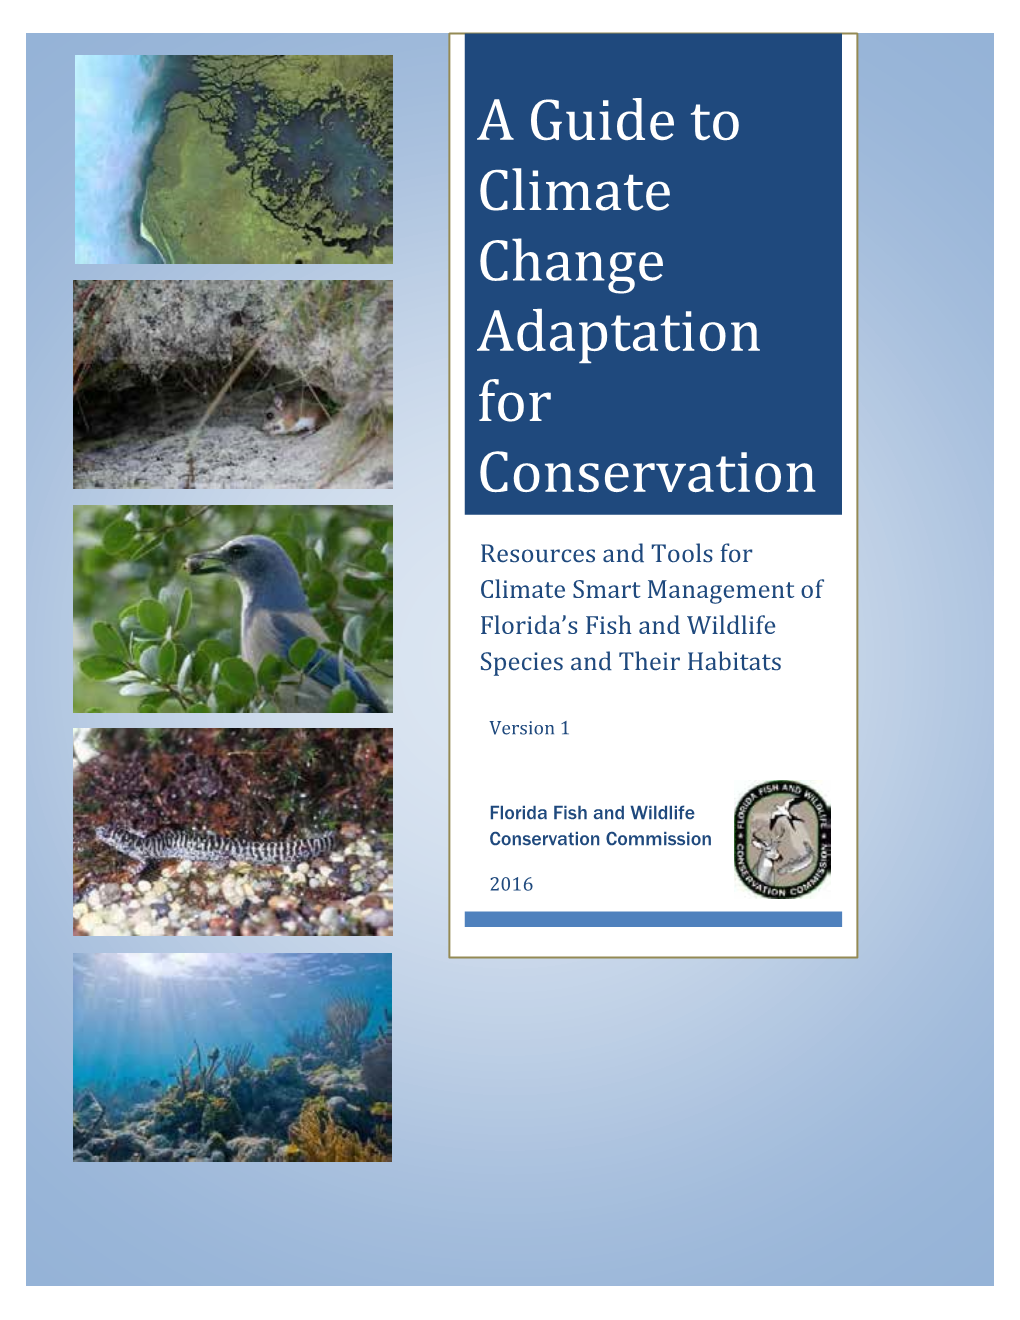 A Guide to Climate Change Adaptation for Conservation